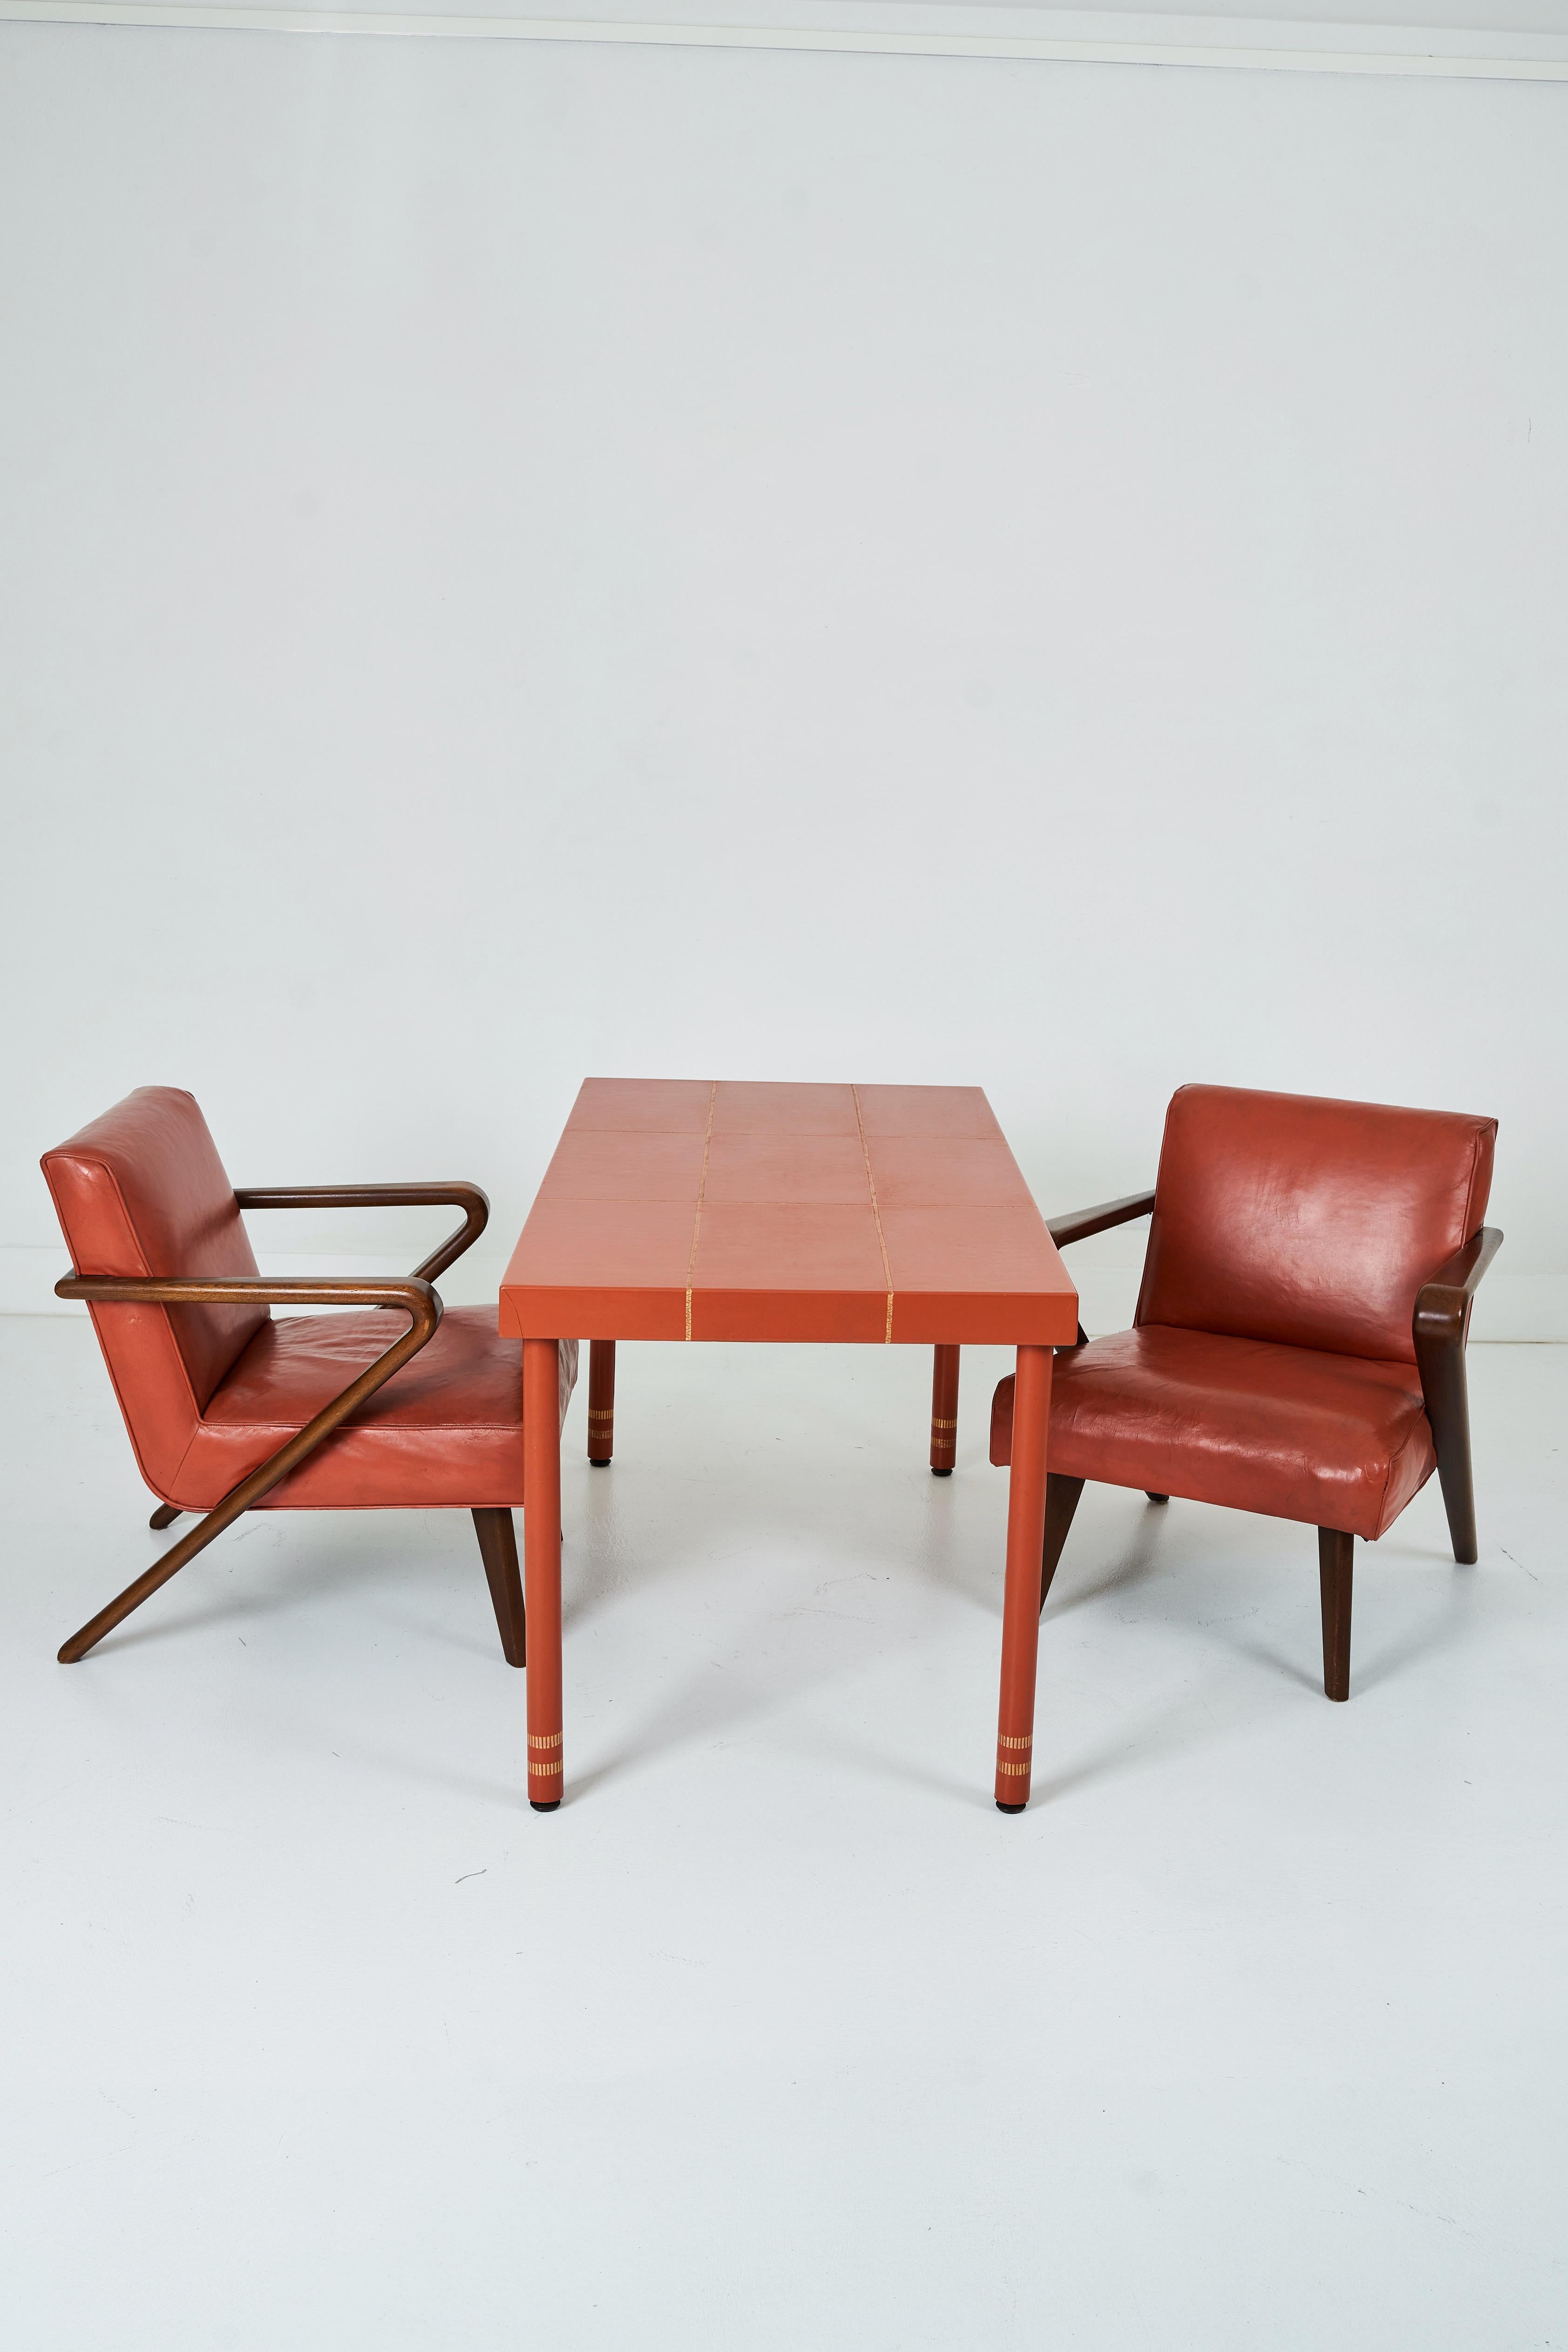 A Leather Wrapped Desk and Matching Arm Chairs designed by William Haines 1